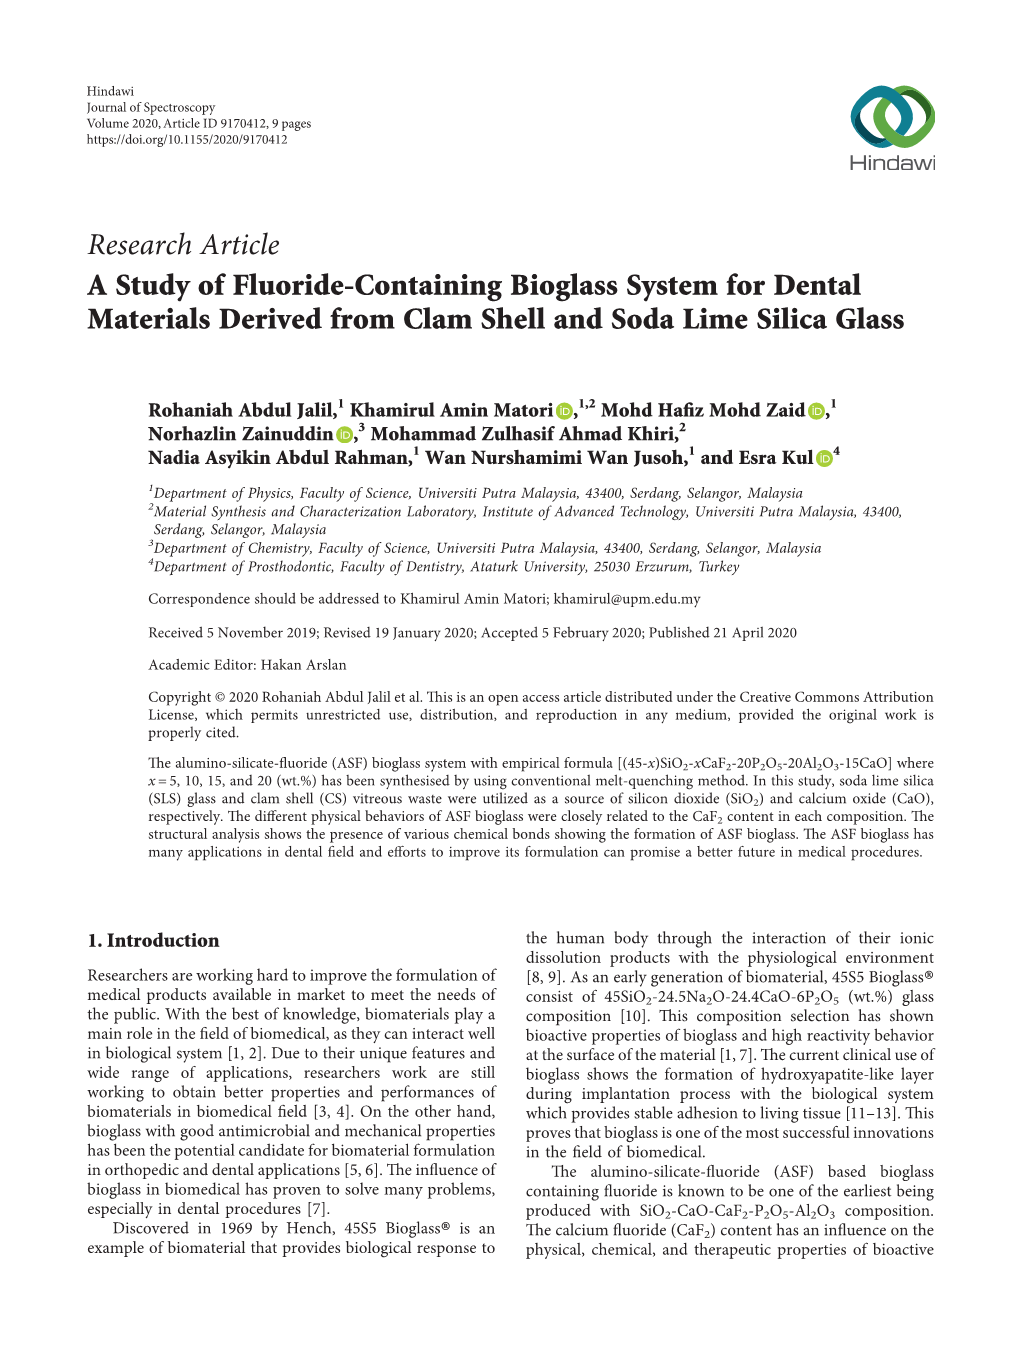 A Study of Fluoride-Containing Bioglass System for Dental Materials Derived from Clam Shell and Soda Lime Silica Glass